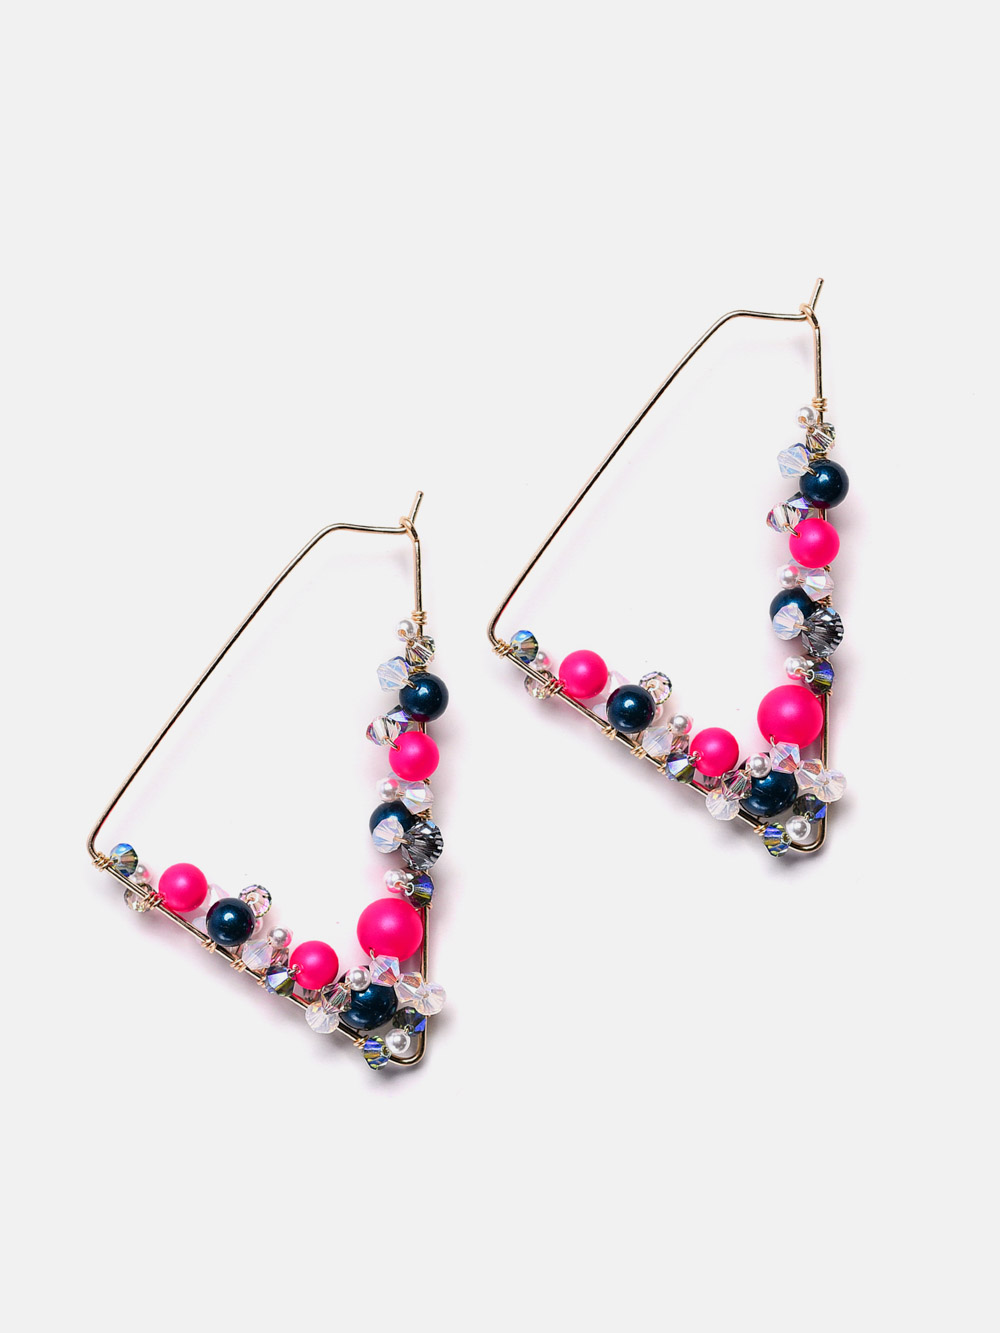 14k gold filled earrings with colorful pearls and crystals